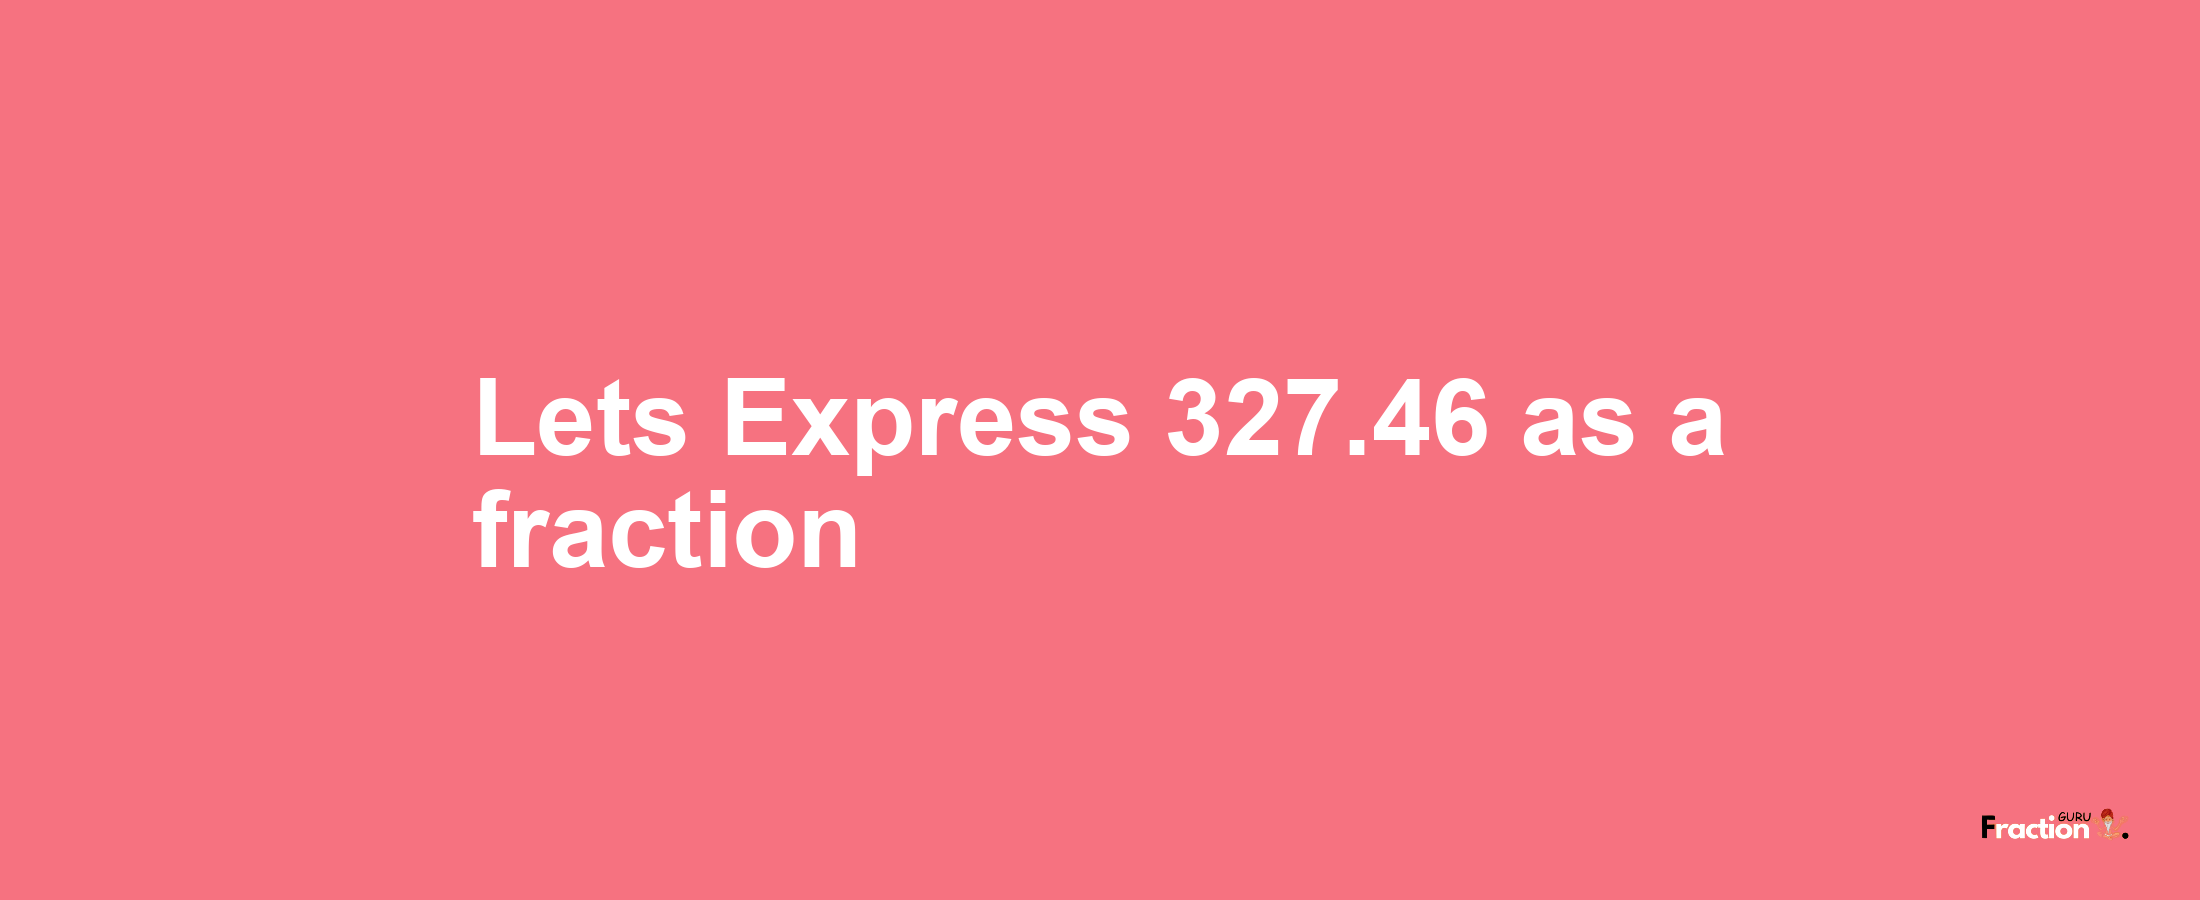 Lets Express 327.46 as afraction